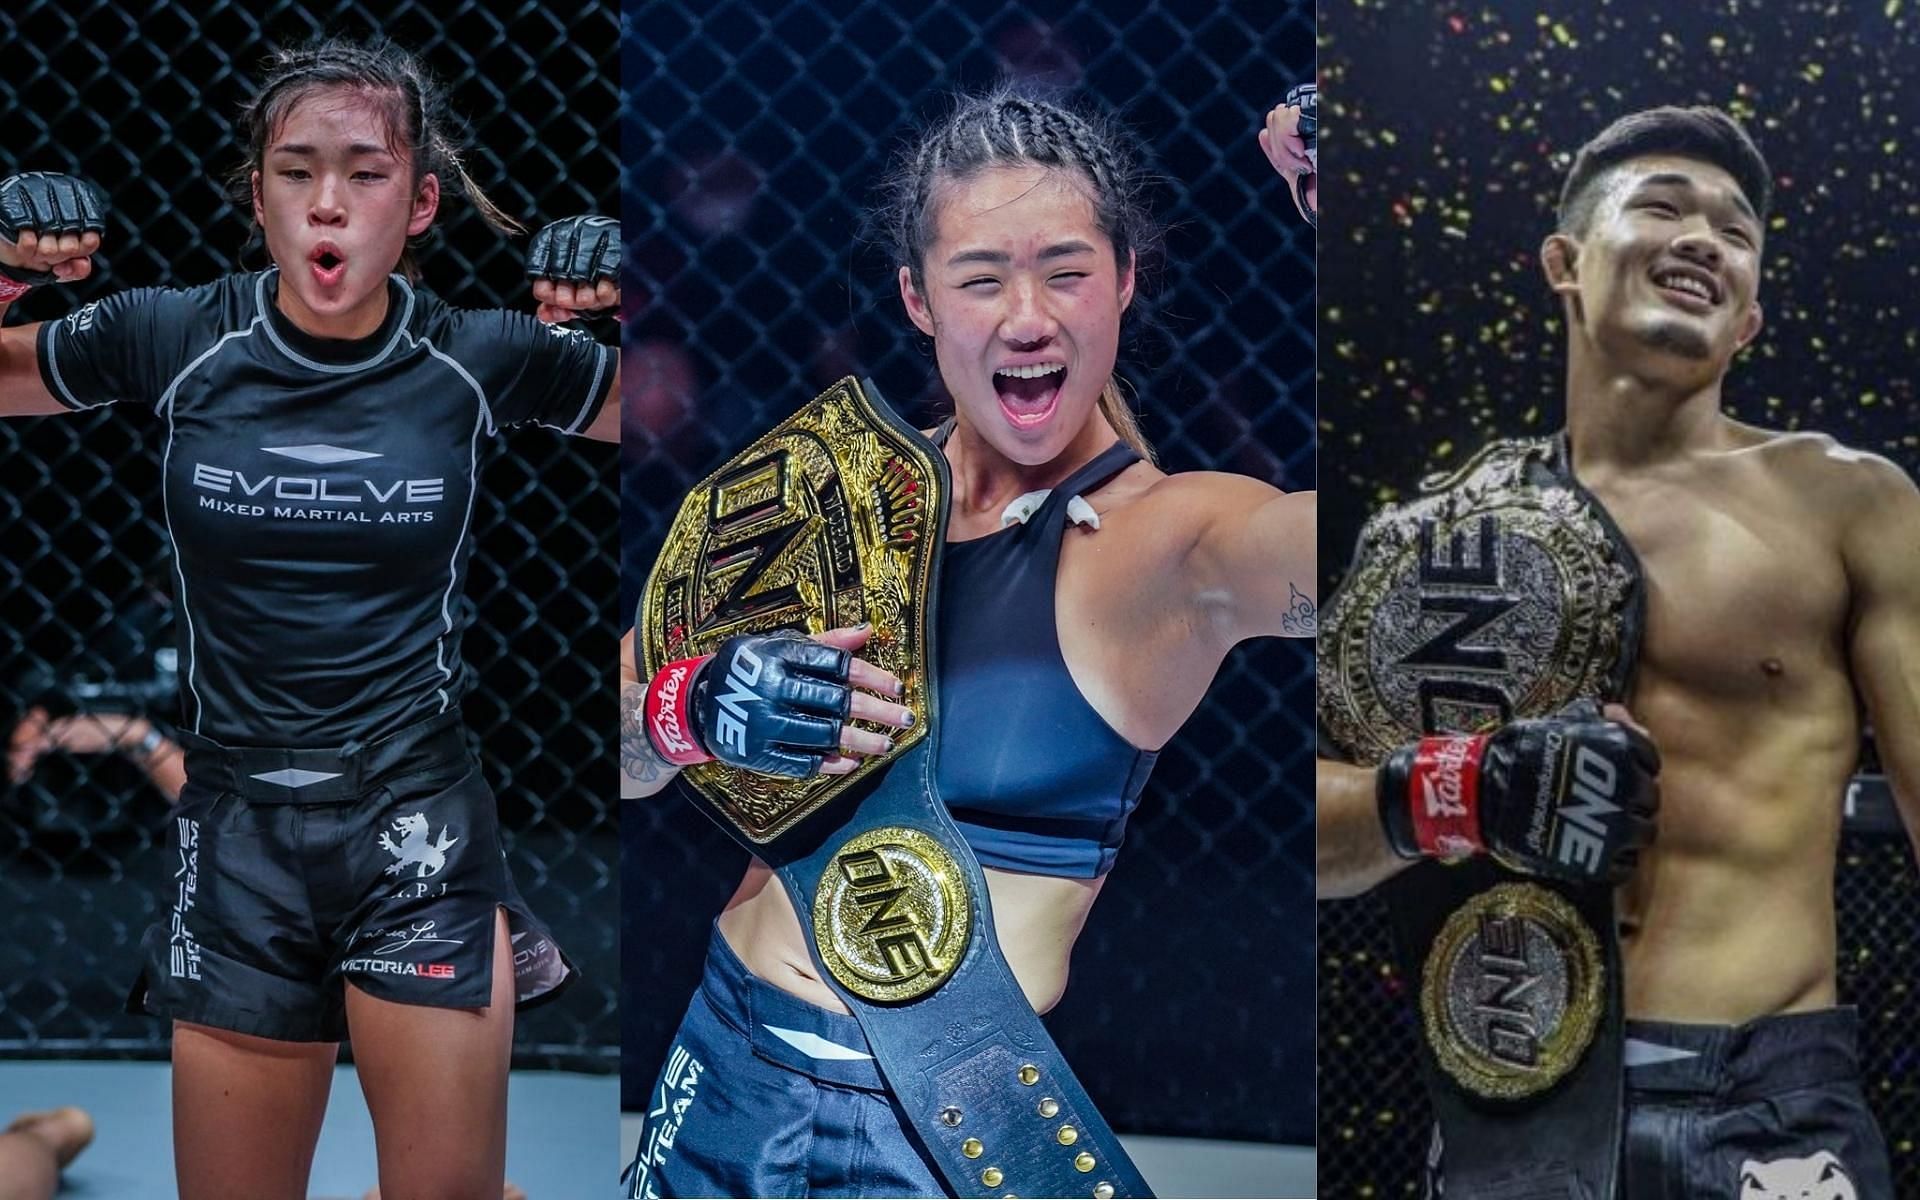 Siblings Victoria (left), Angela (middle) and Christian Lee (right) are some of the best fighters on the ONE roster today (Images courtesy of ONE Championship)